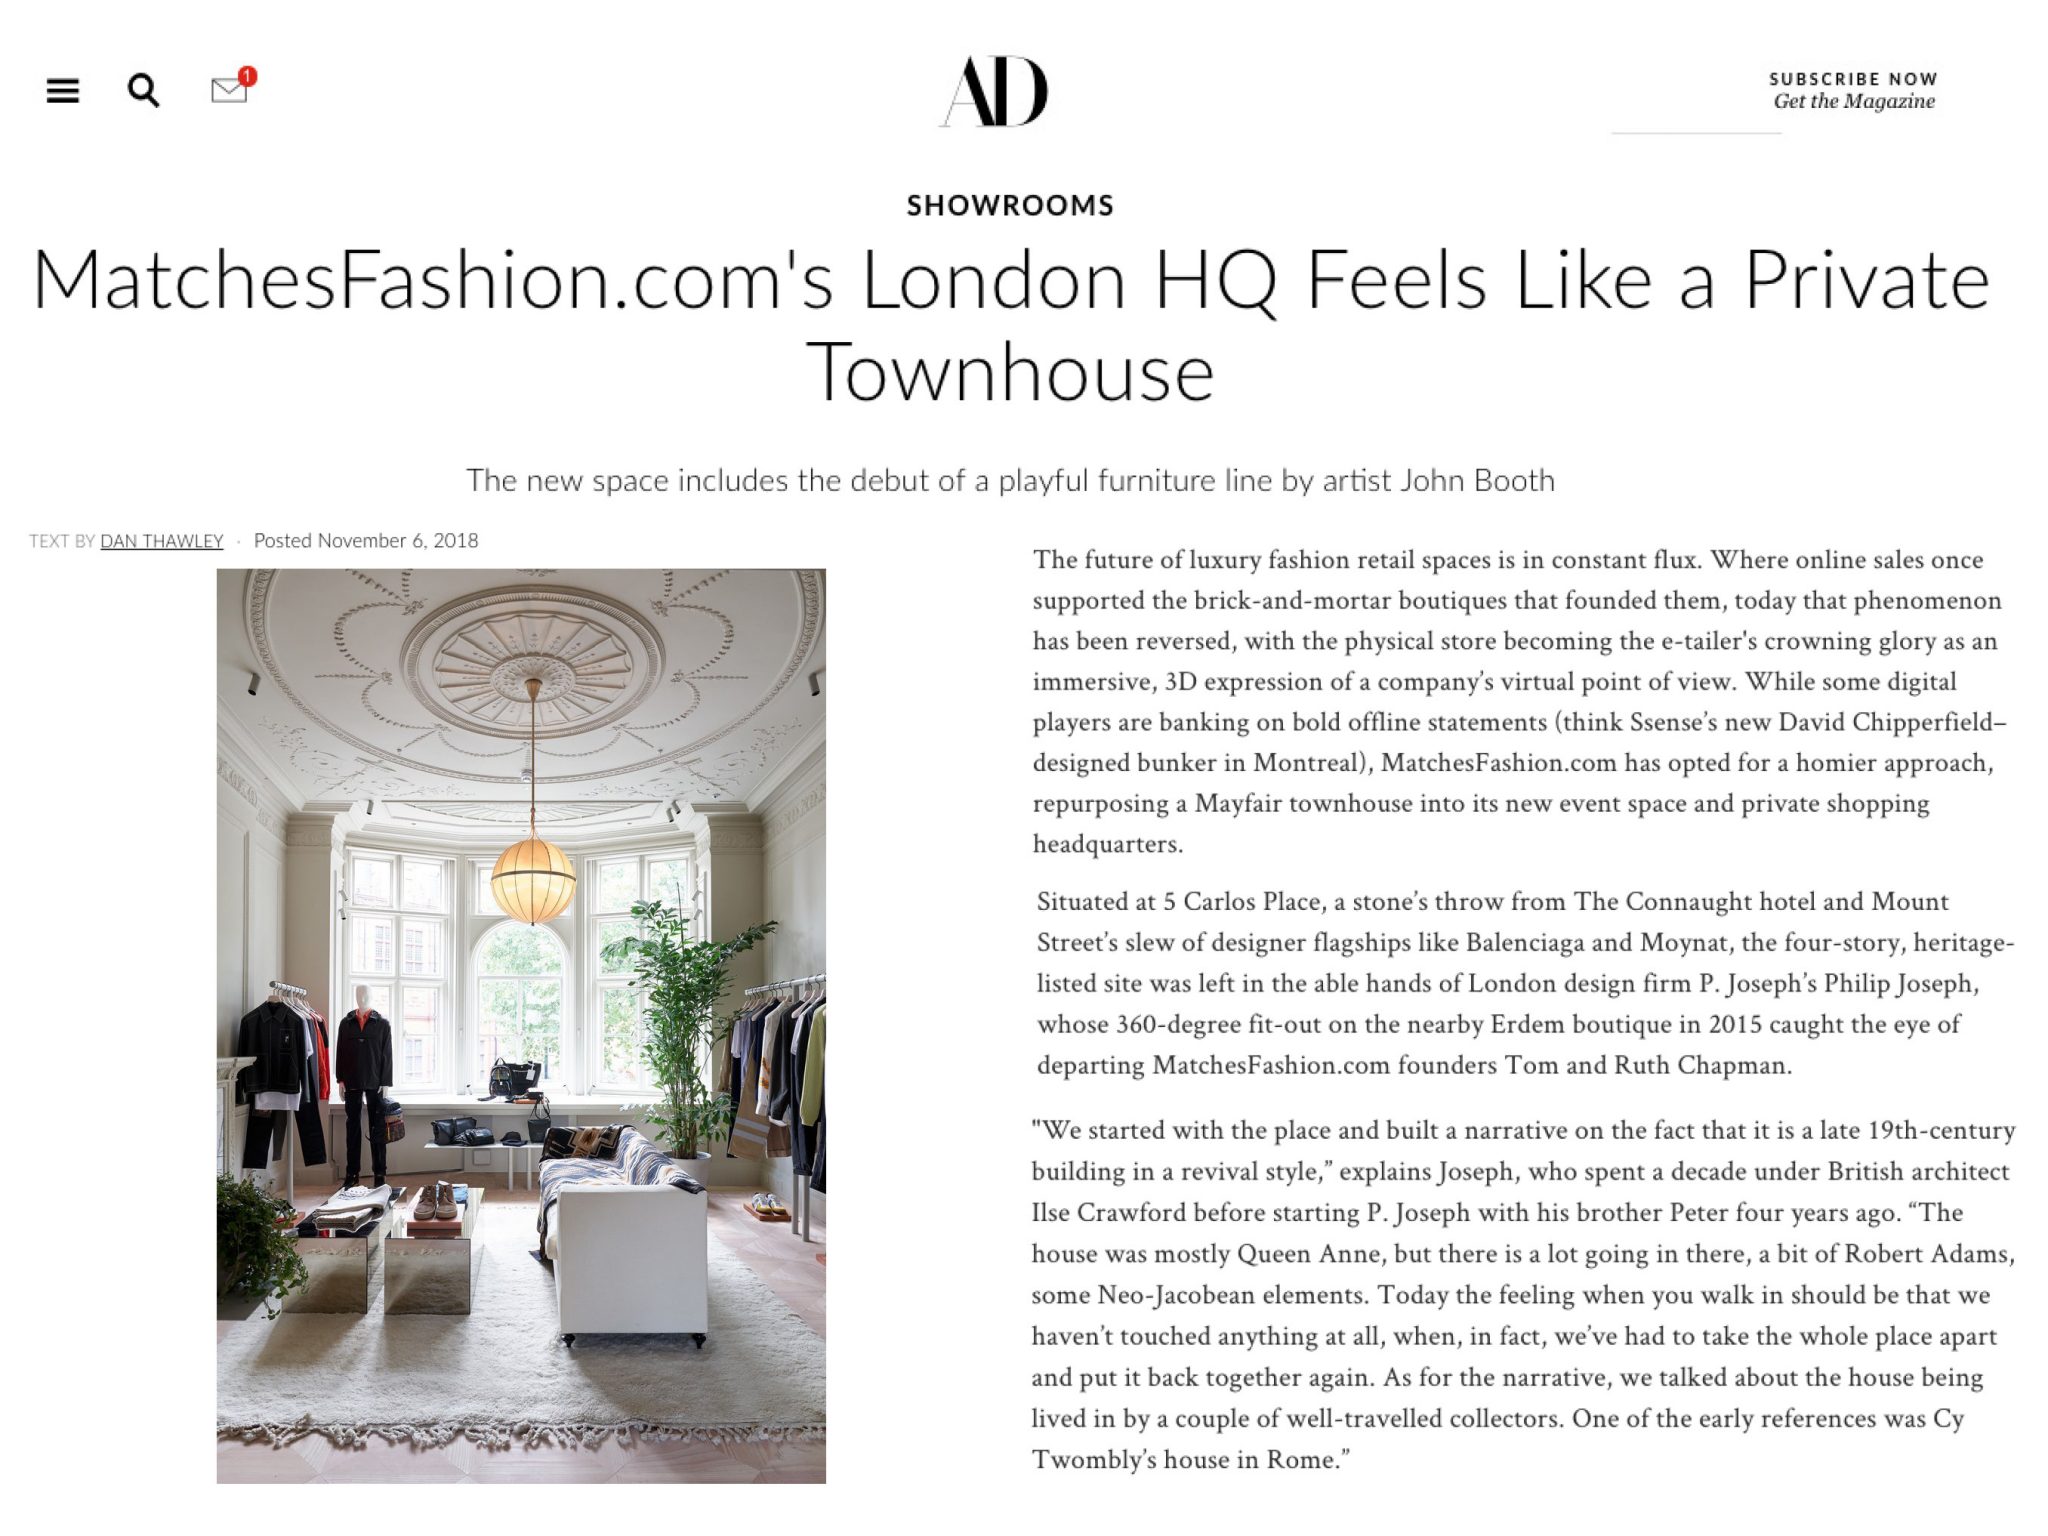 Dan Thawley | Architectural Digest | AD: MatchesFashion.com's London HQ feels like a private townhouse | 3